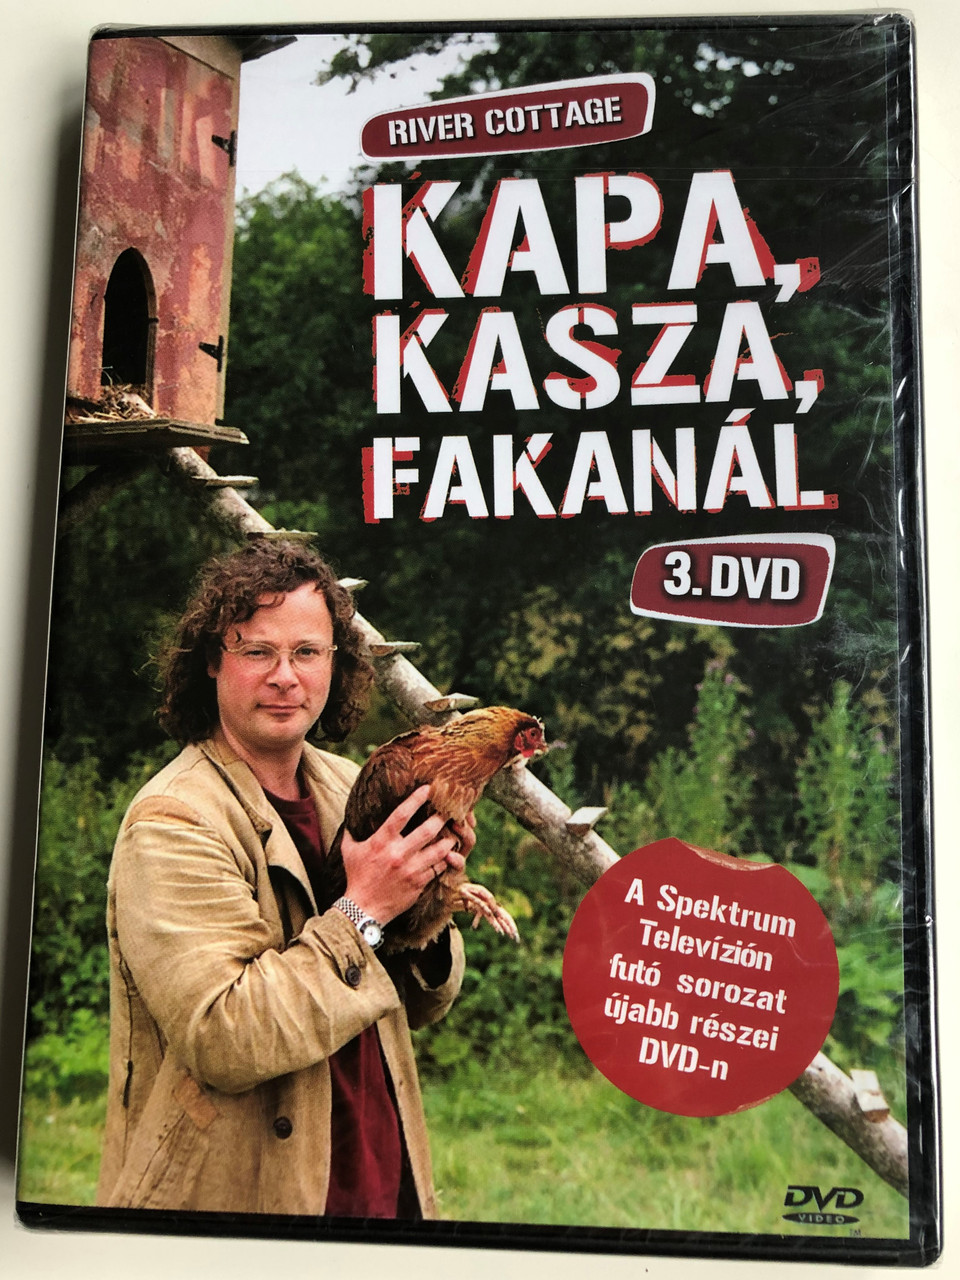 River Cottage Disc 3 DVD 1999 Kapa, kasza, fakanál / Directed by Zam  Baring, Andrew Palmer, Billy Paulett / Cooking with Hugh  Fearnley-Whittingstall / 3 Episodes on Disc / ER6052 - bibleinmylanguage